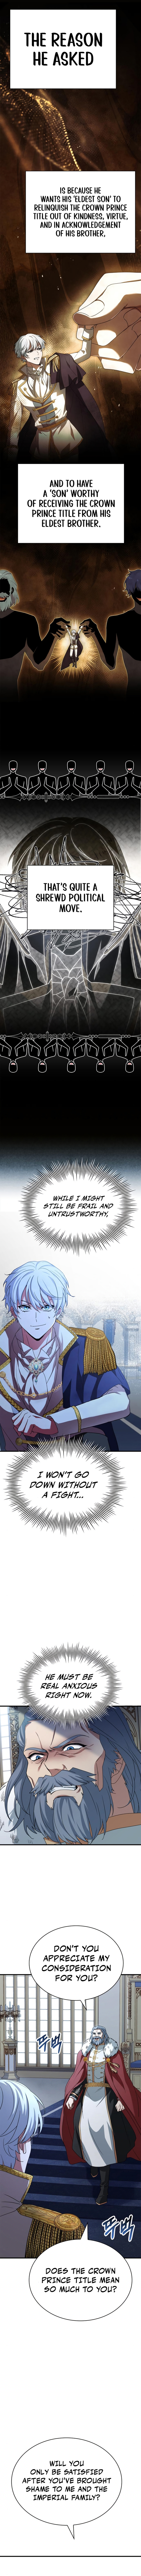 The Crown Prince That Sells Medicine, Chapter 6 image 07